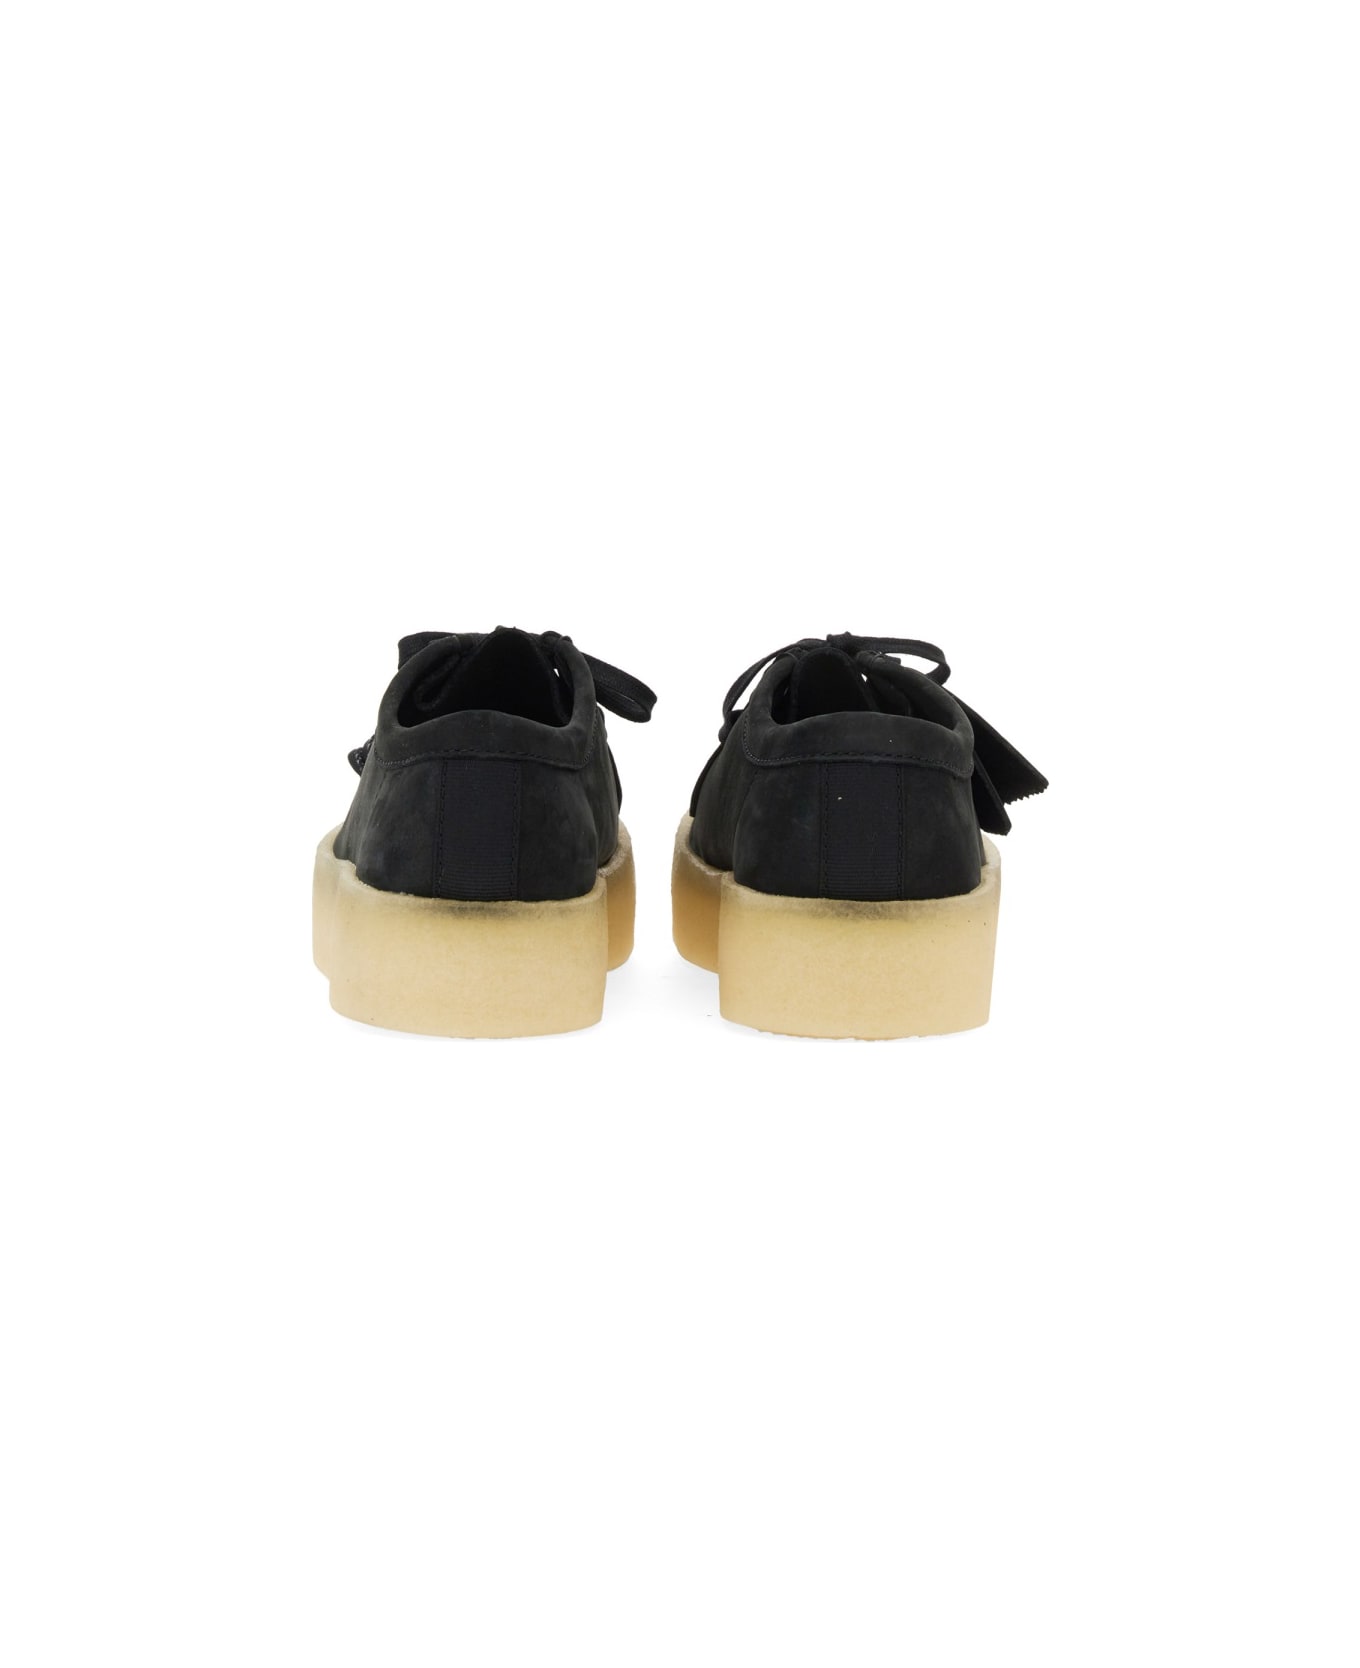 Clarks Moccasin Wallabee Cup - BLACK